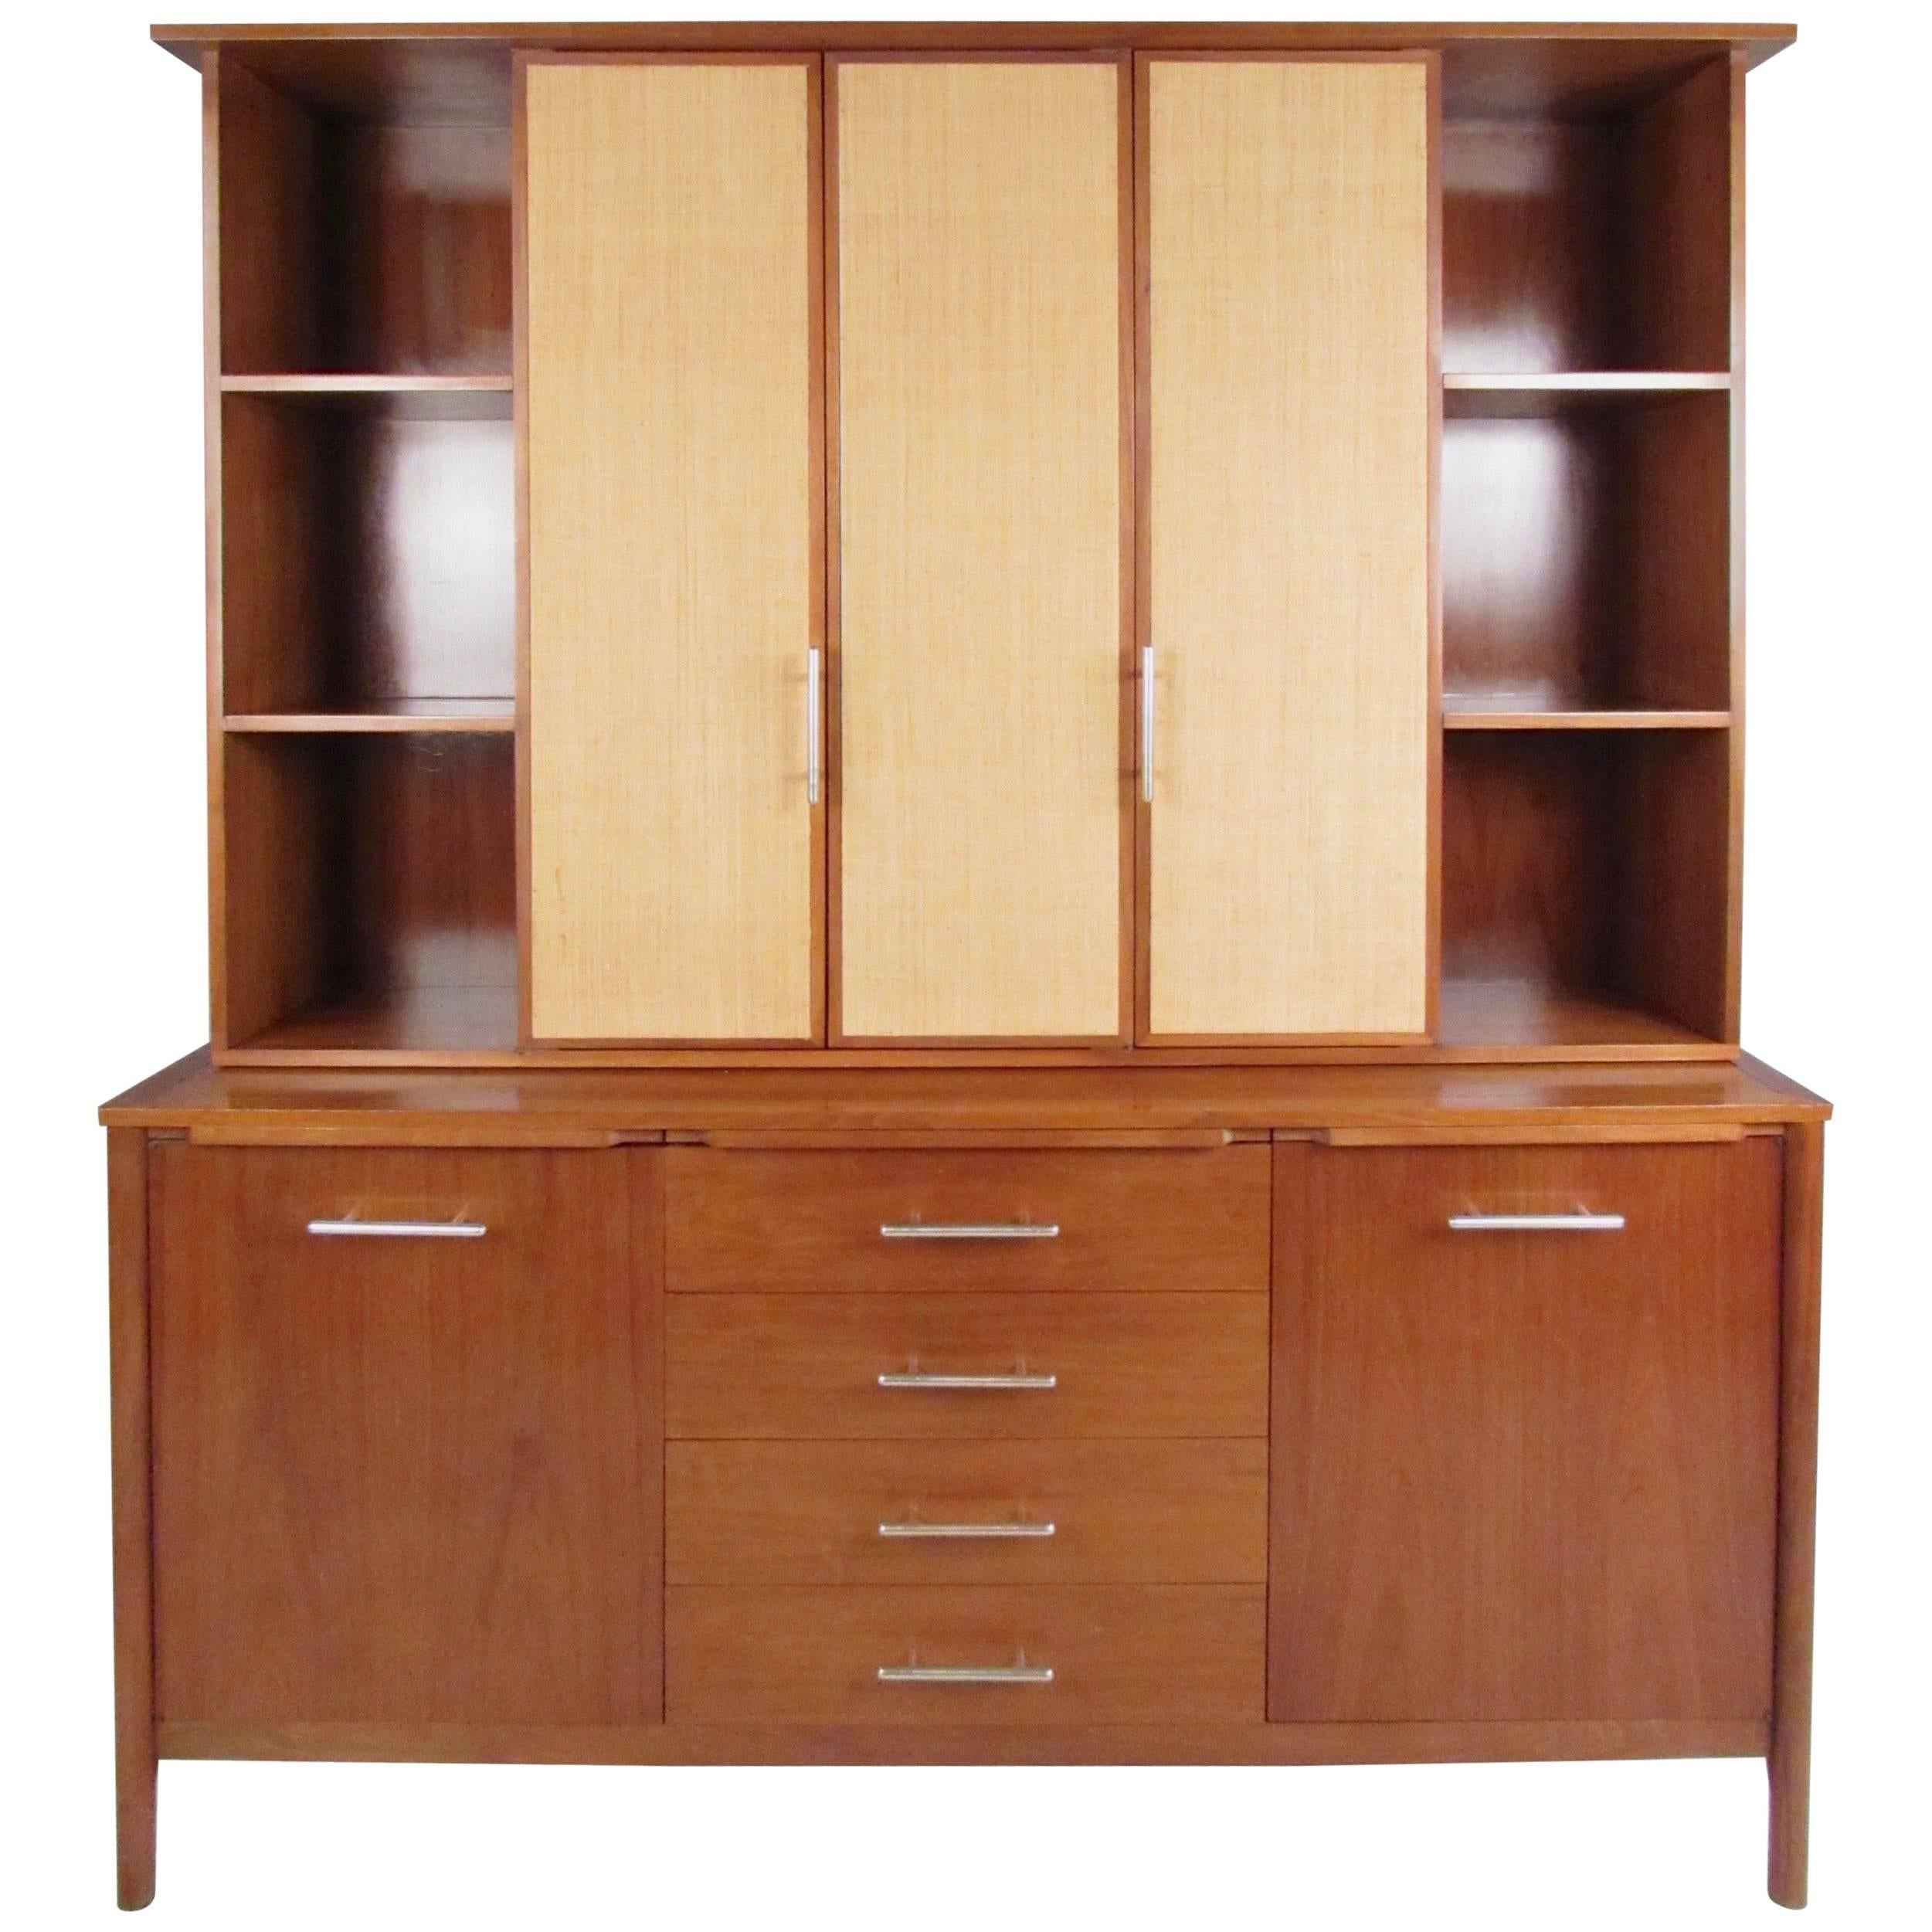 Impressive Two-Piece Sideboard with Hutch by John Stuart